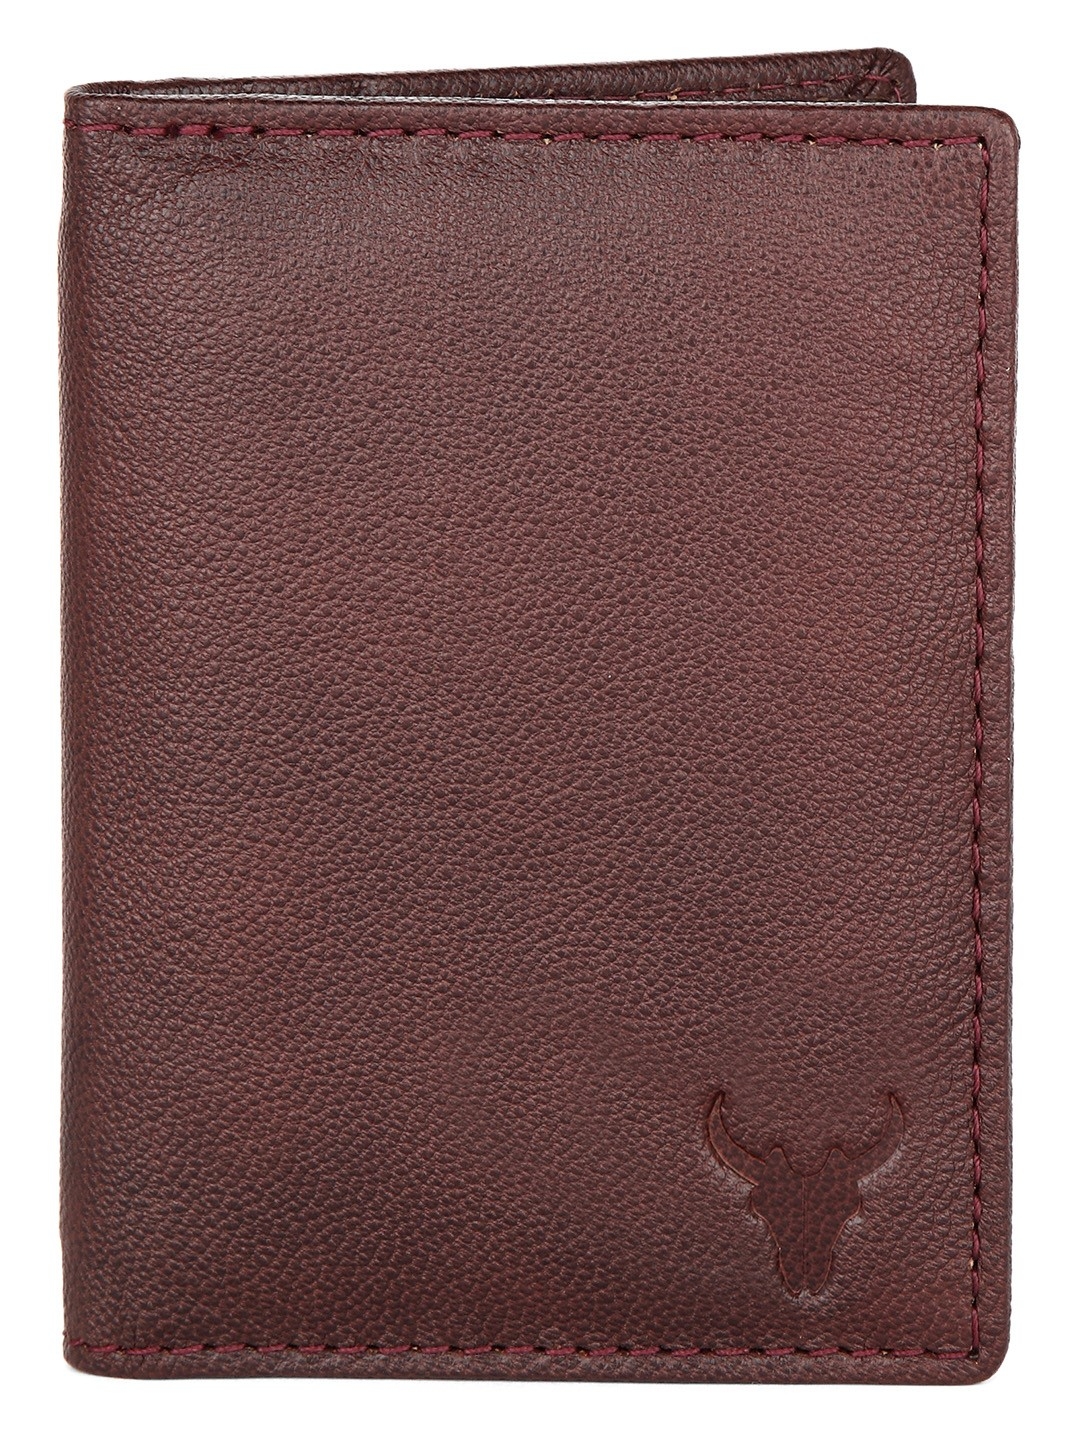 Napa Hide | Napa Hide RFID Protected Genuine High Quality Maroon Leather Card Holder For Men